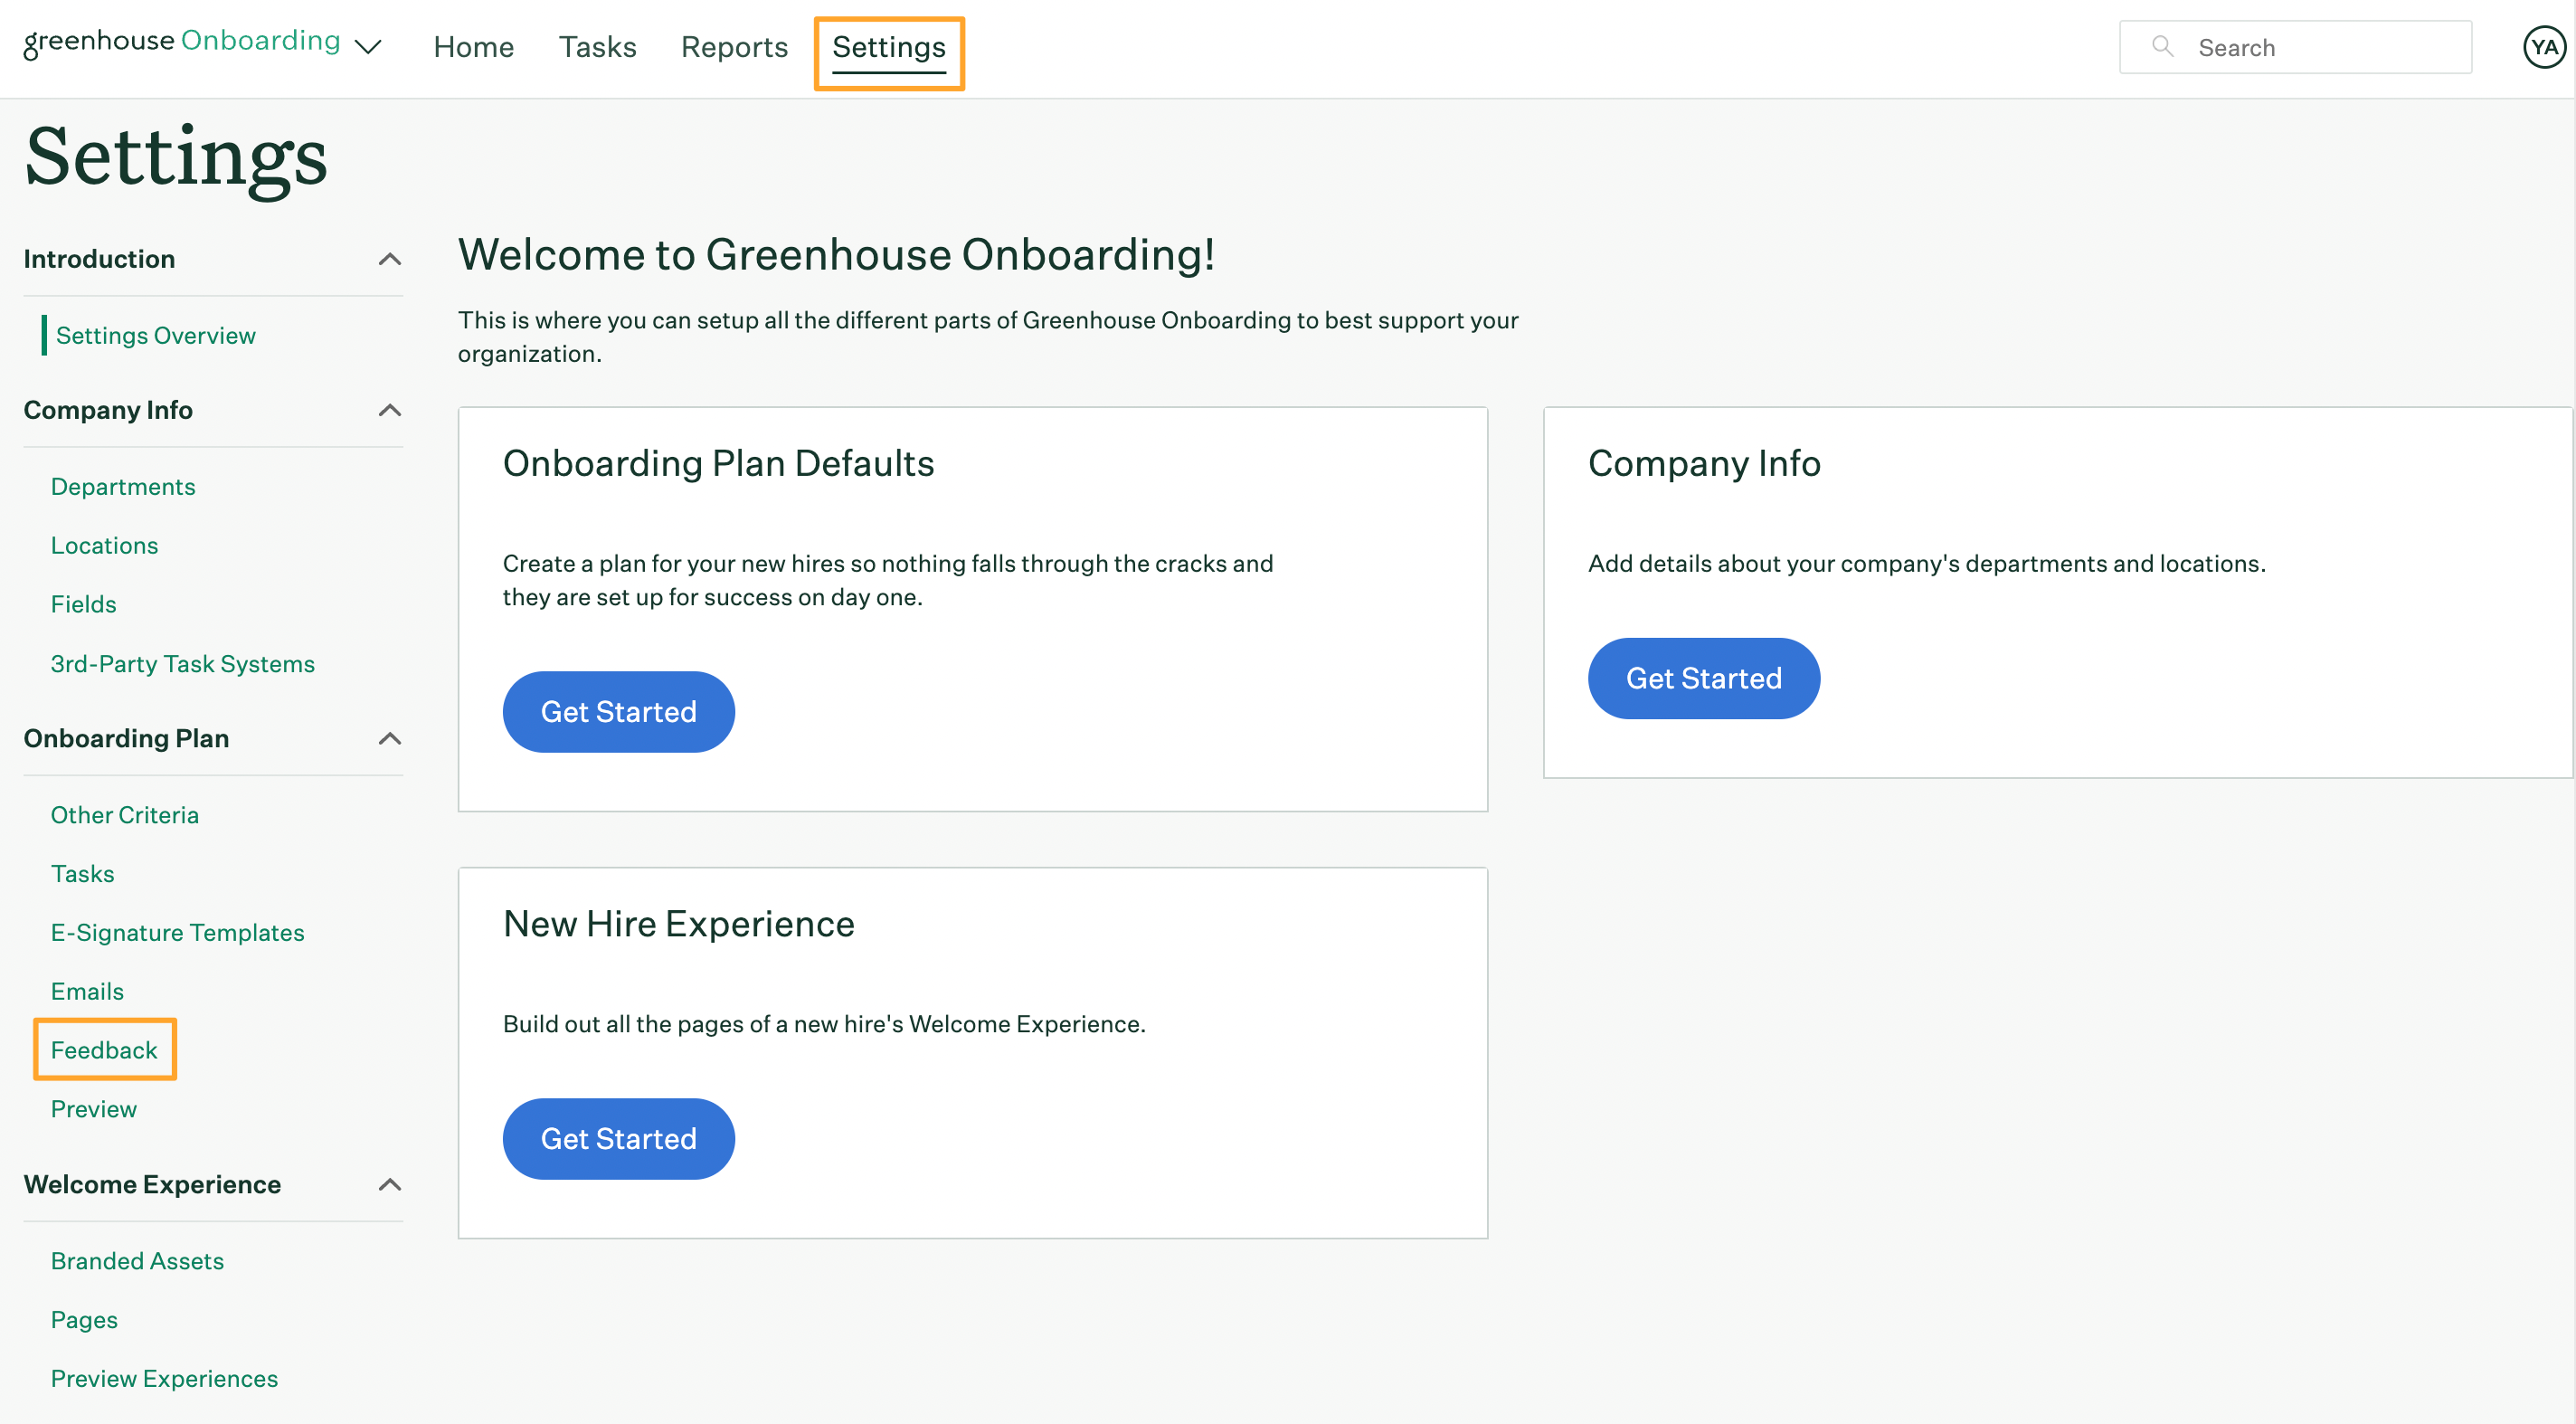 Greenhouse-Onboarding-settings-page-with-settings-tab-and-feedback-tab-highlighted.png